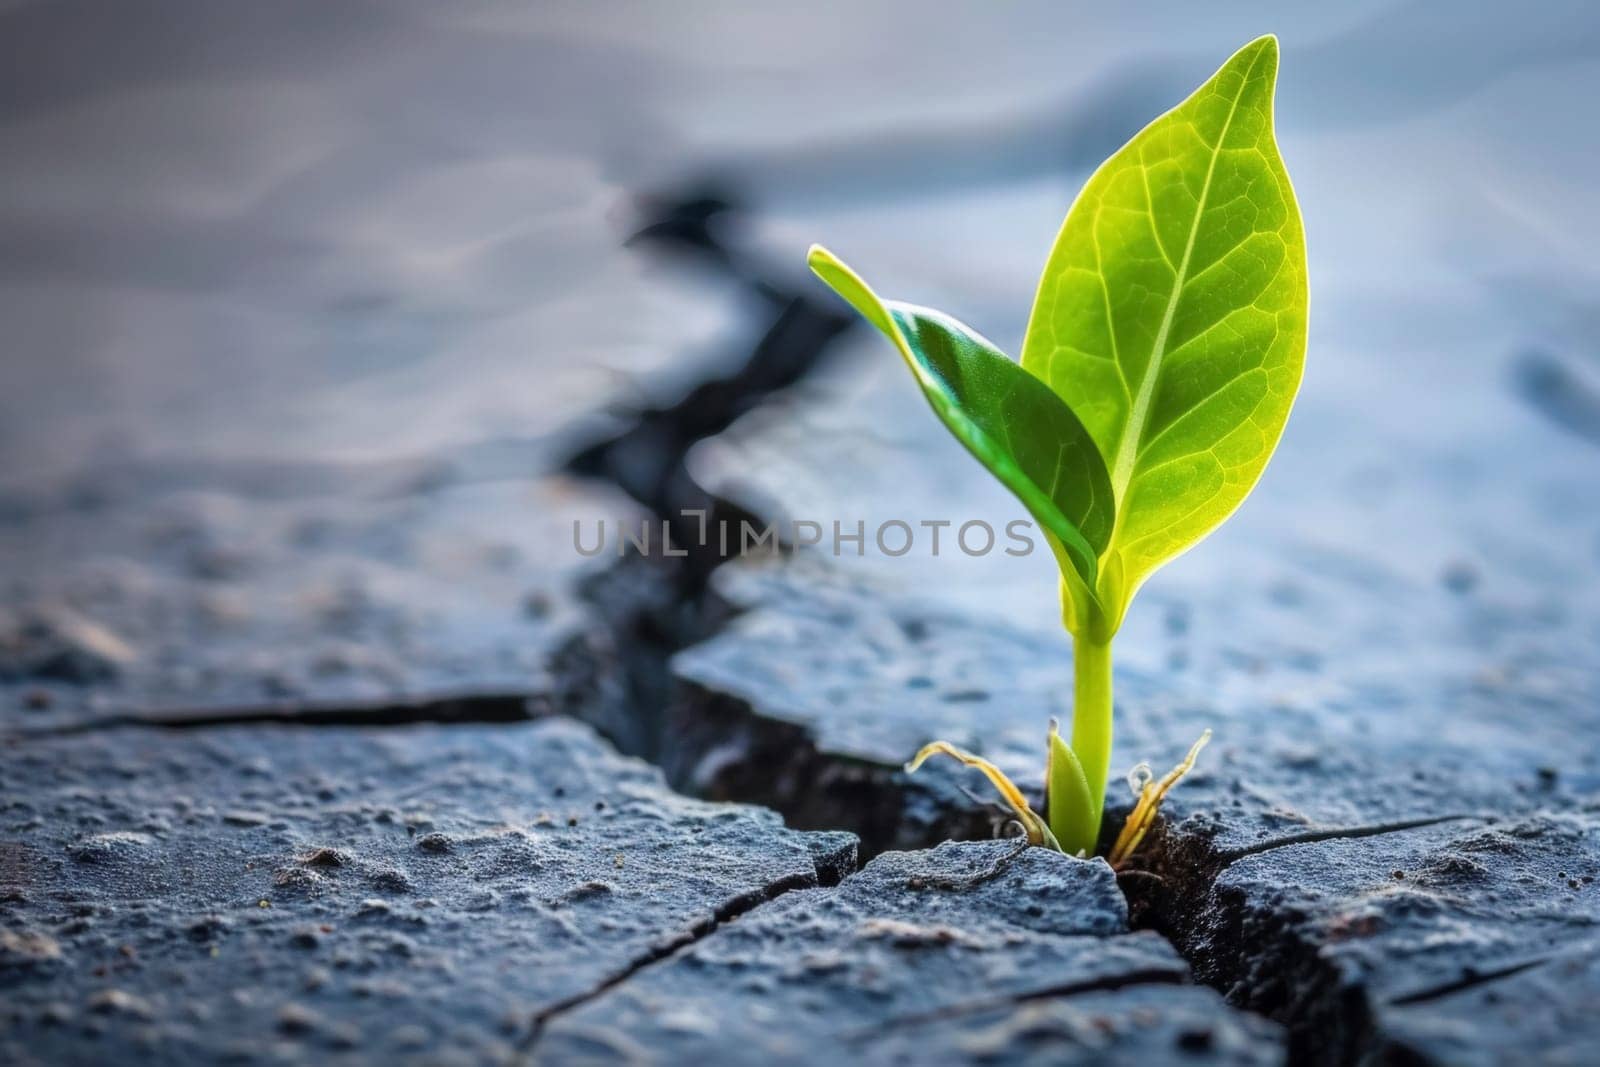 A lone sapling emerges from a web of cracked soil, a testament to life's resilience against the backdrop of environmental hardship